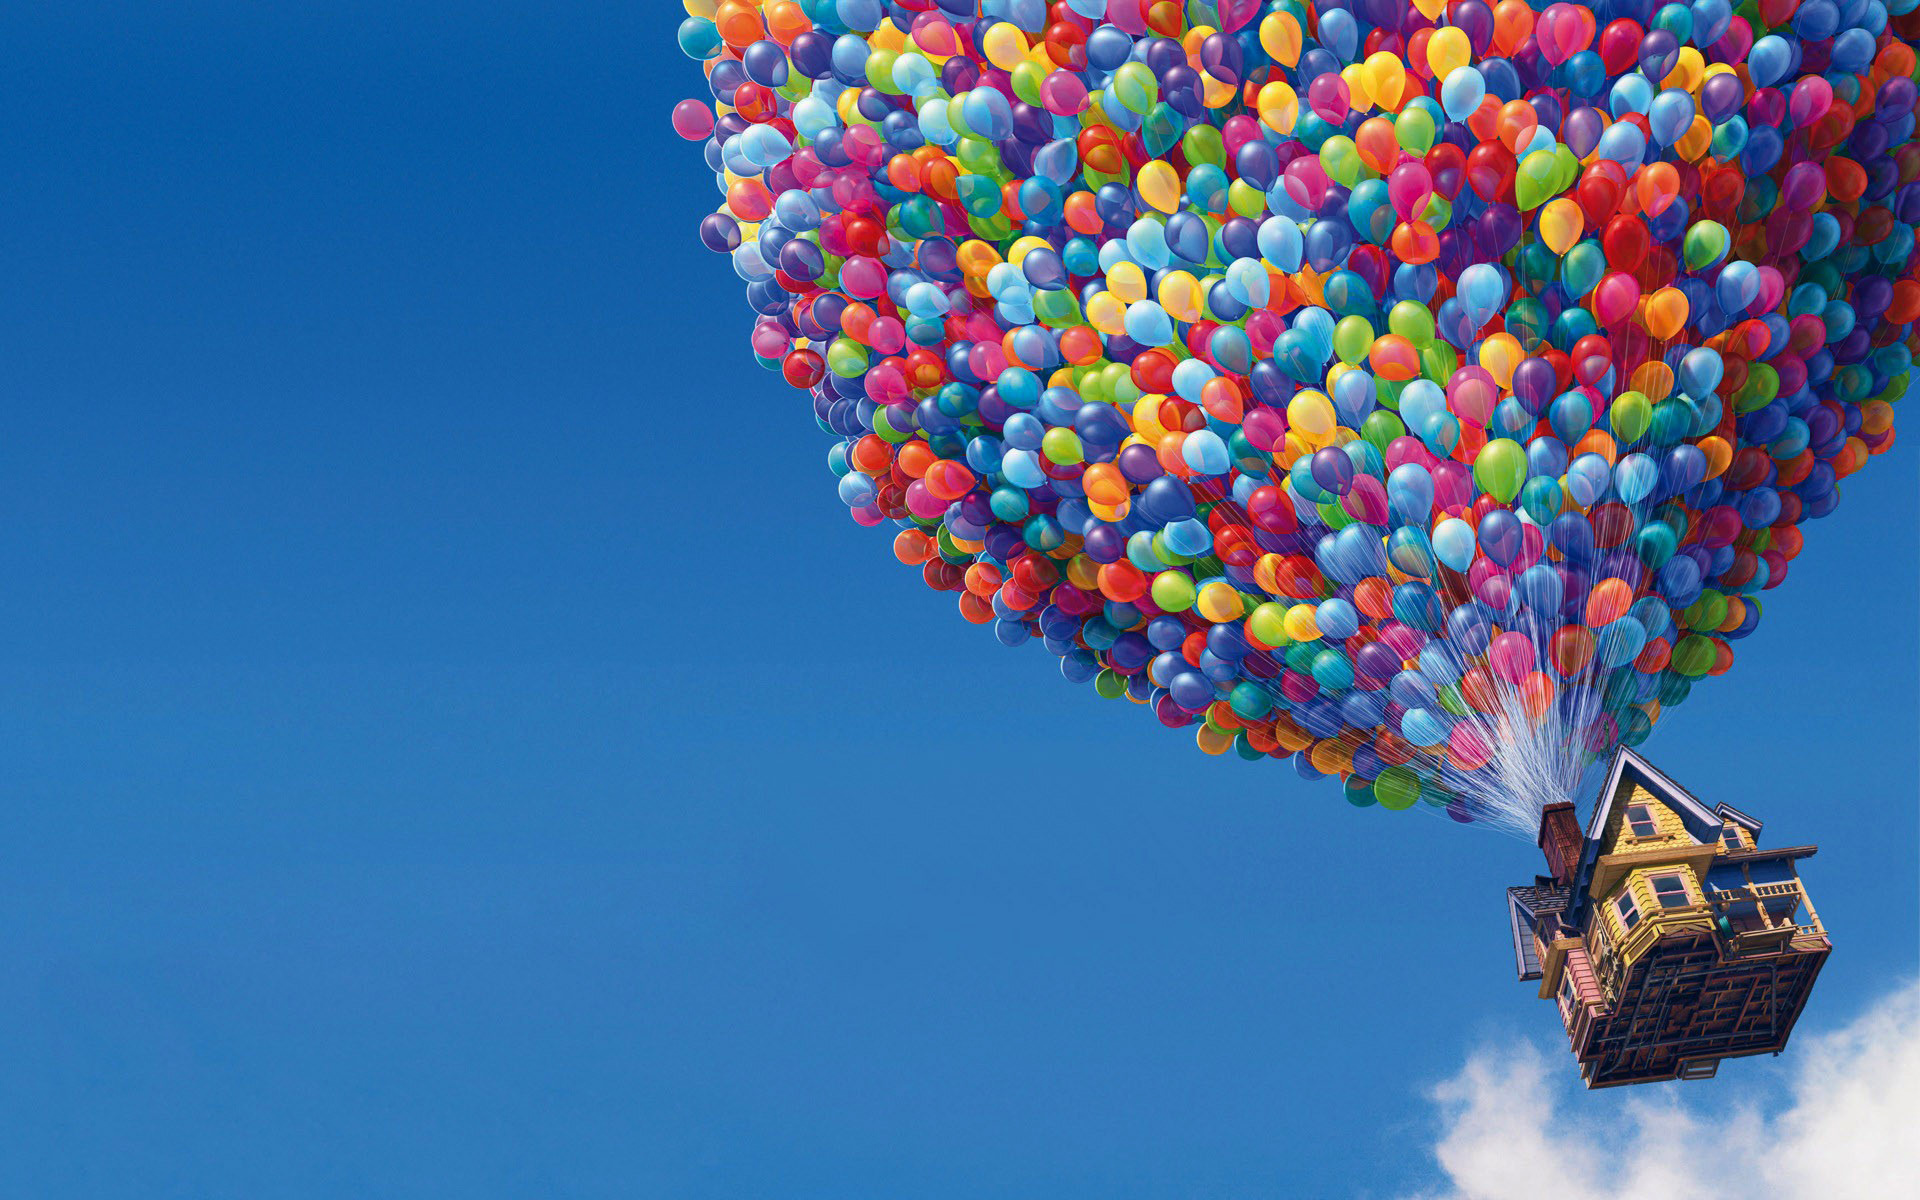 Free_Scenery_Wallpaper__Includes_an_UP_Movie_Balloons_House_a_Wonderful_Scene_in_the_Sky.jpg